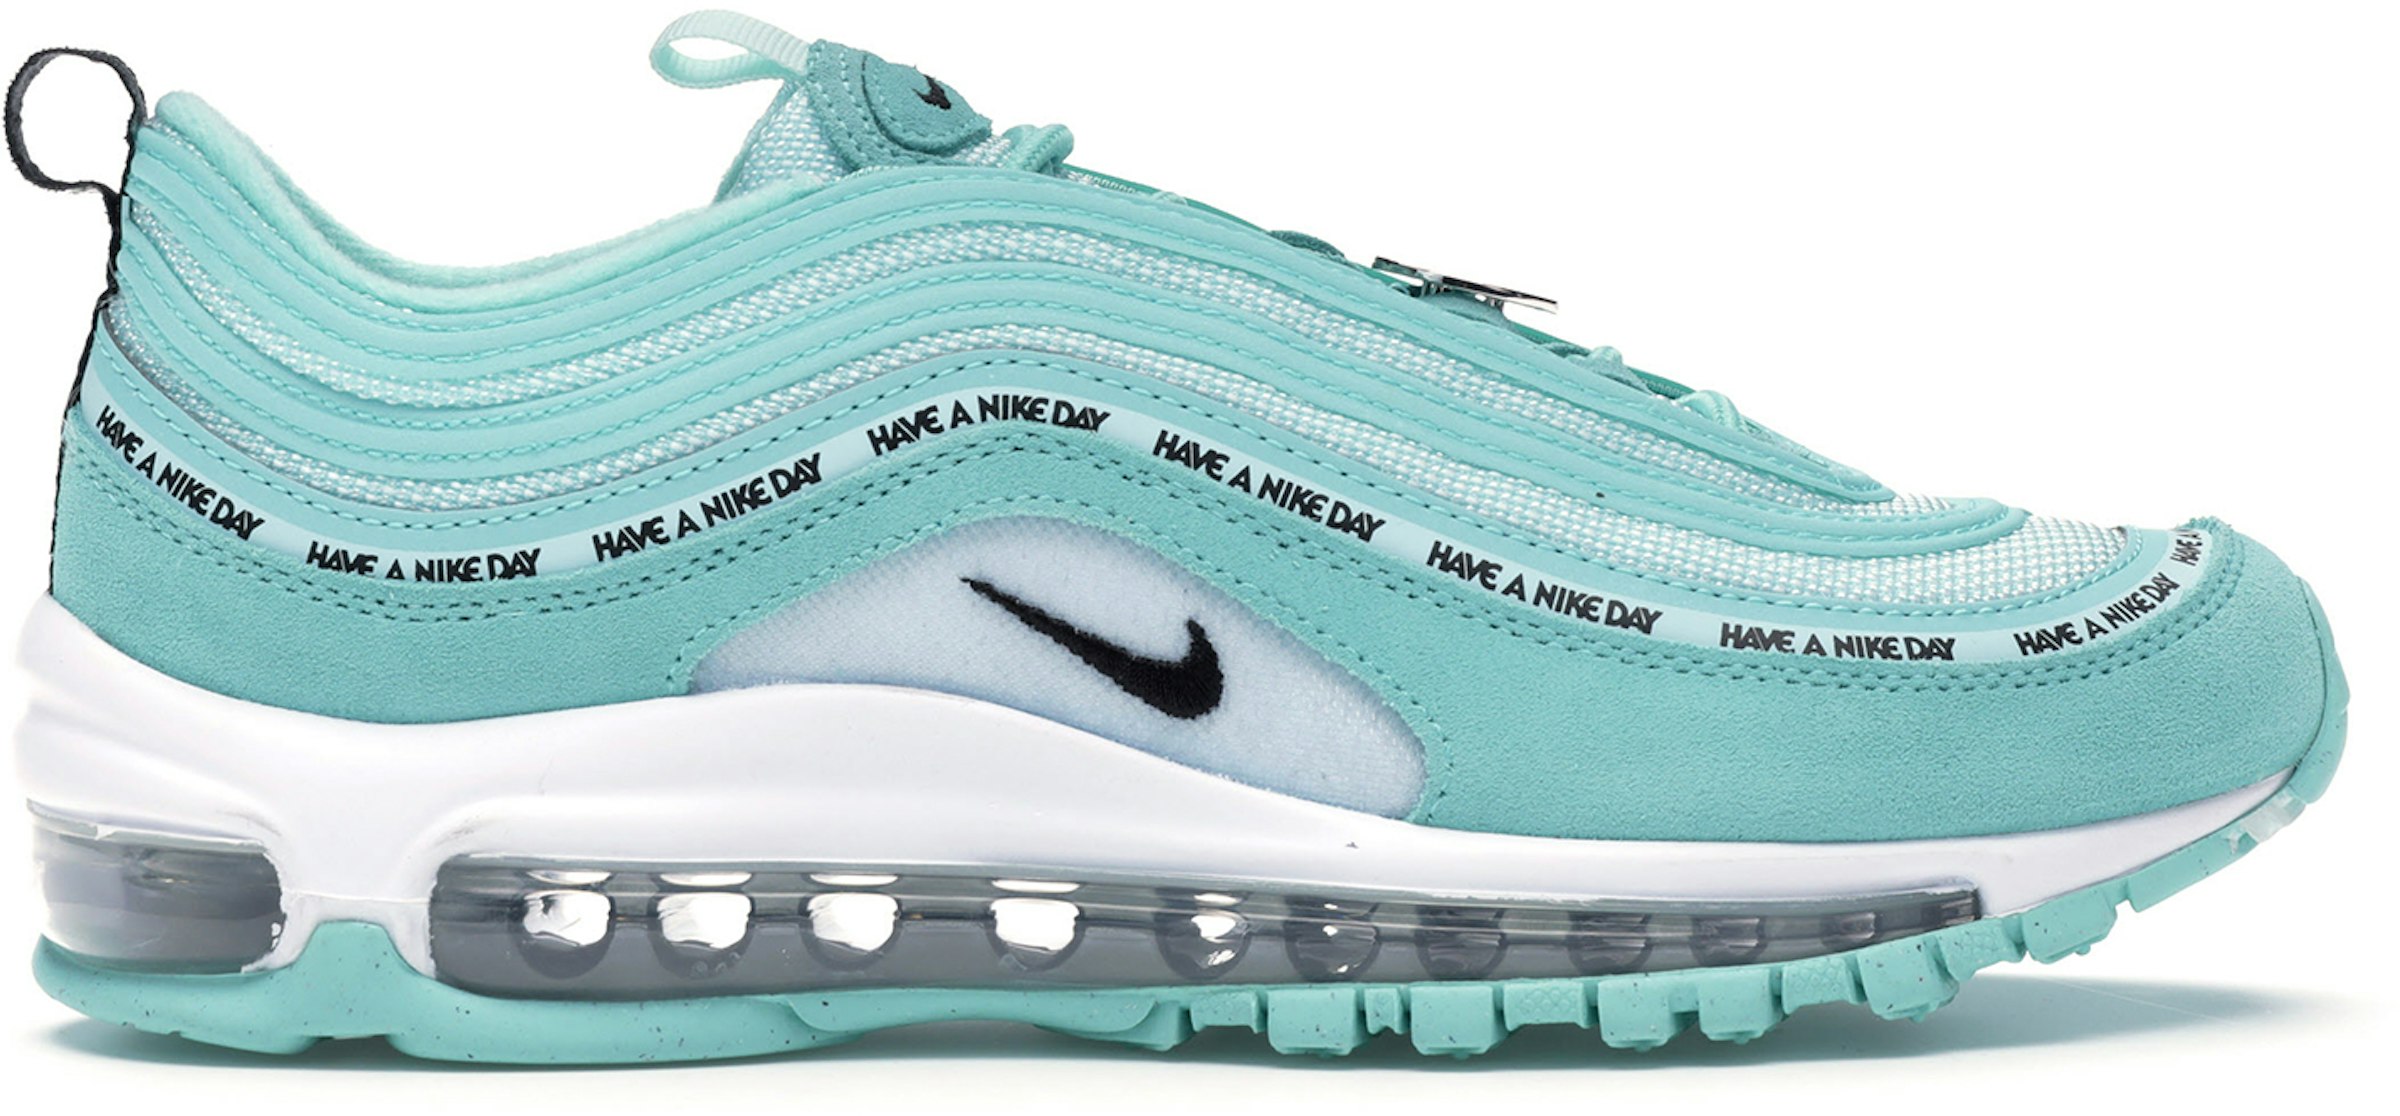 Nike Air Max 97 Have a Nike Day Tropical (GS) Kids' - 923288-300 - US